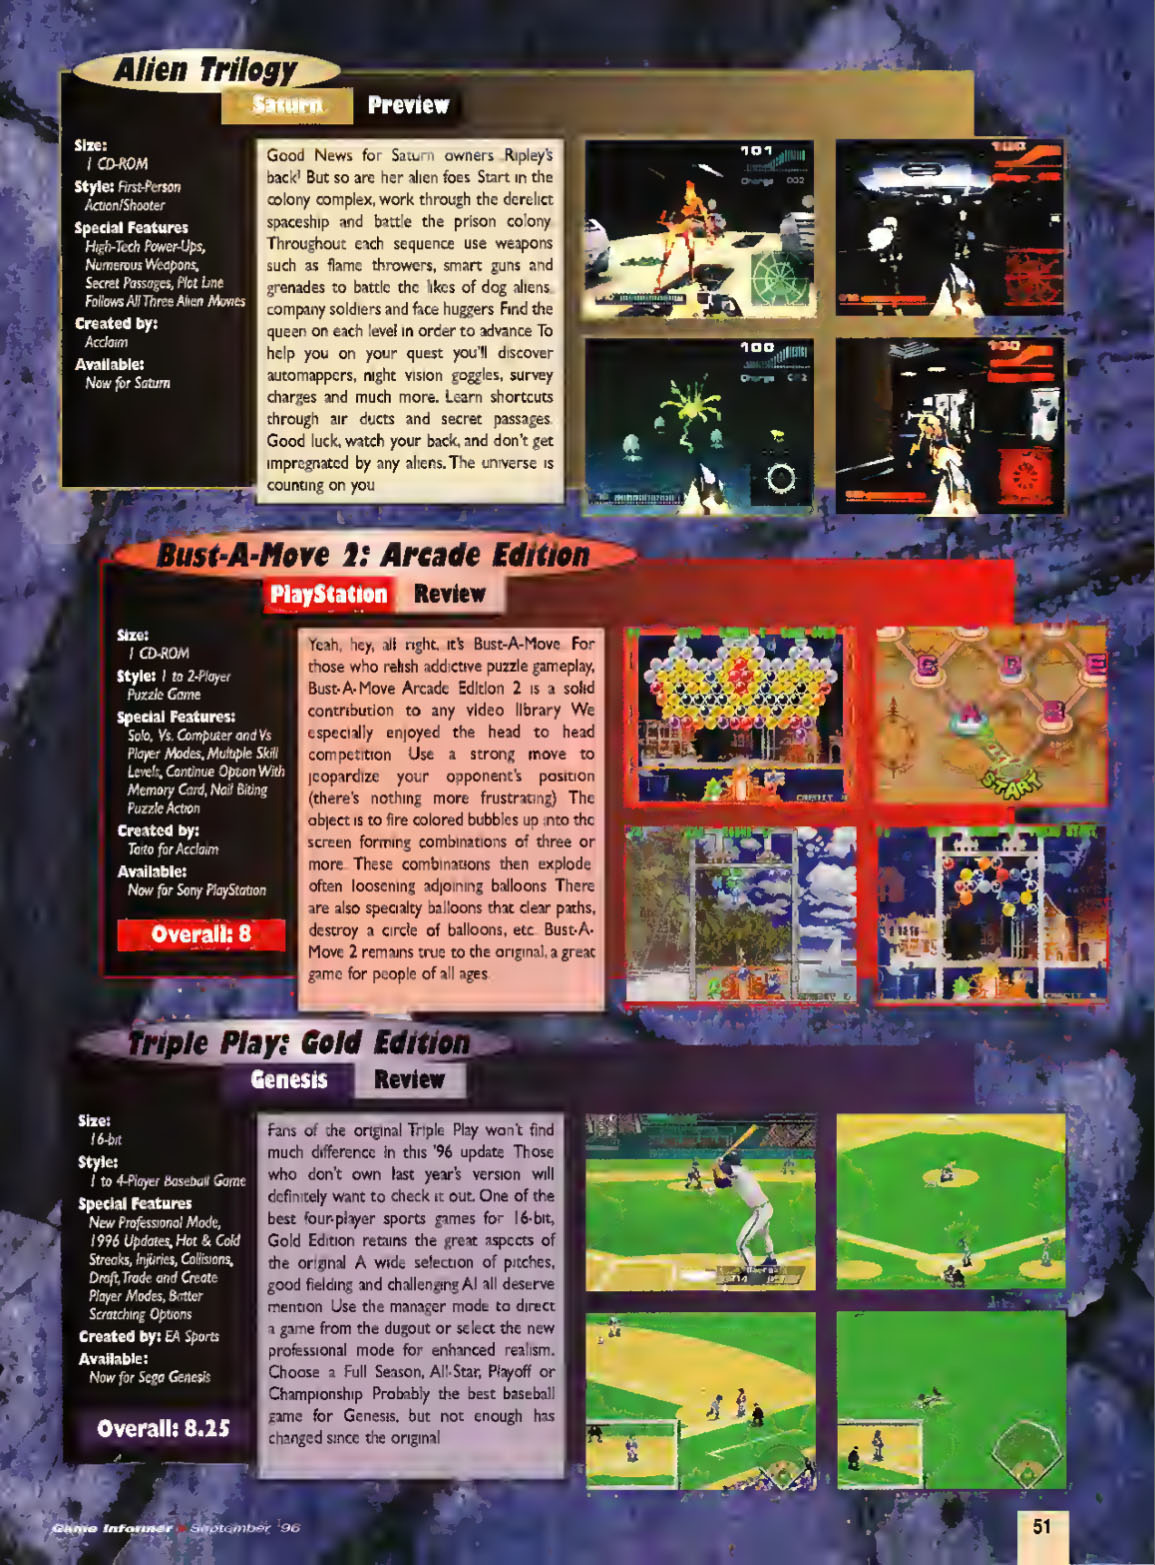 Triple Play: Gold Edition Review, Game Informer September 1996 page 51